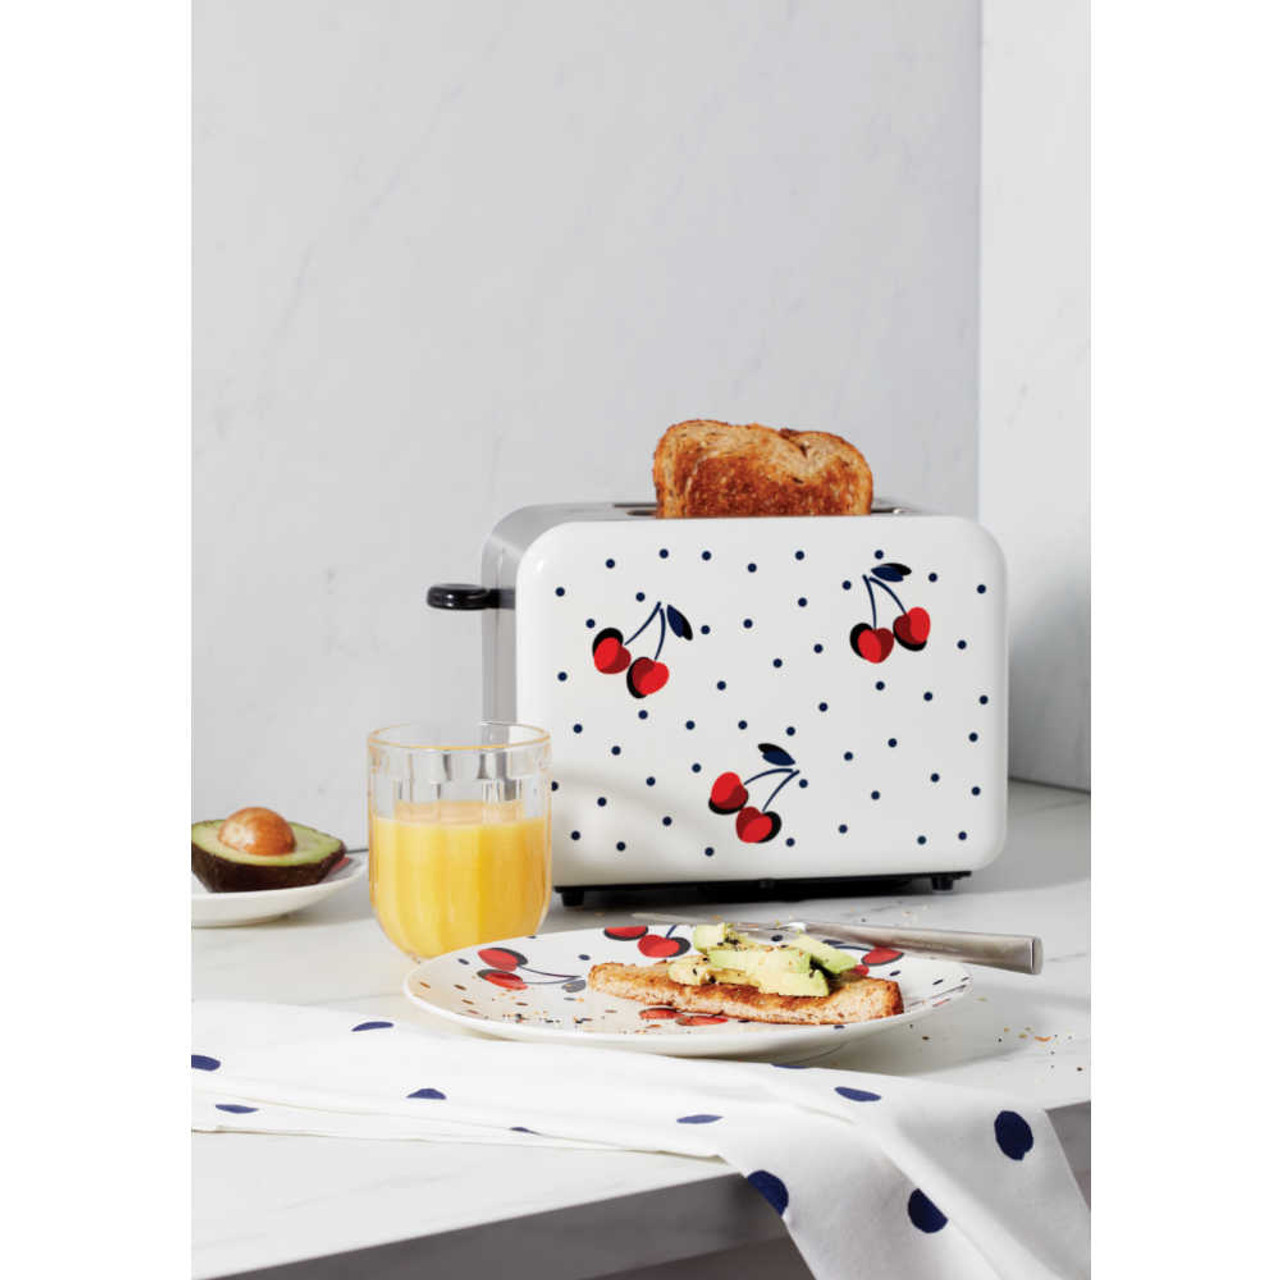 https://cdn11.bigcommerce.com/s-hccytny0od/images/stencil/1280x1280/products/4711/19187/Kate_Spade_Vintage_Cherry_Dot_Toaster_2__91692.1652148934.jpg?c=2?imbypass=on